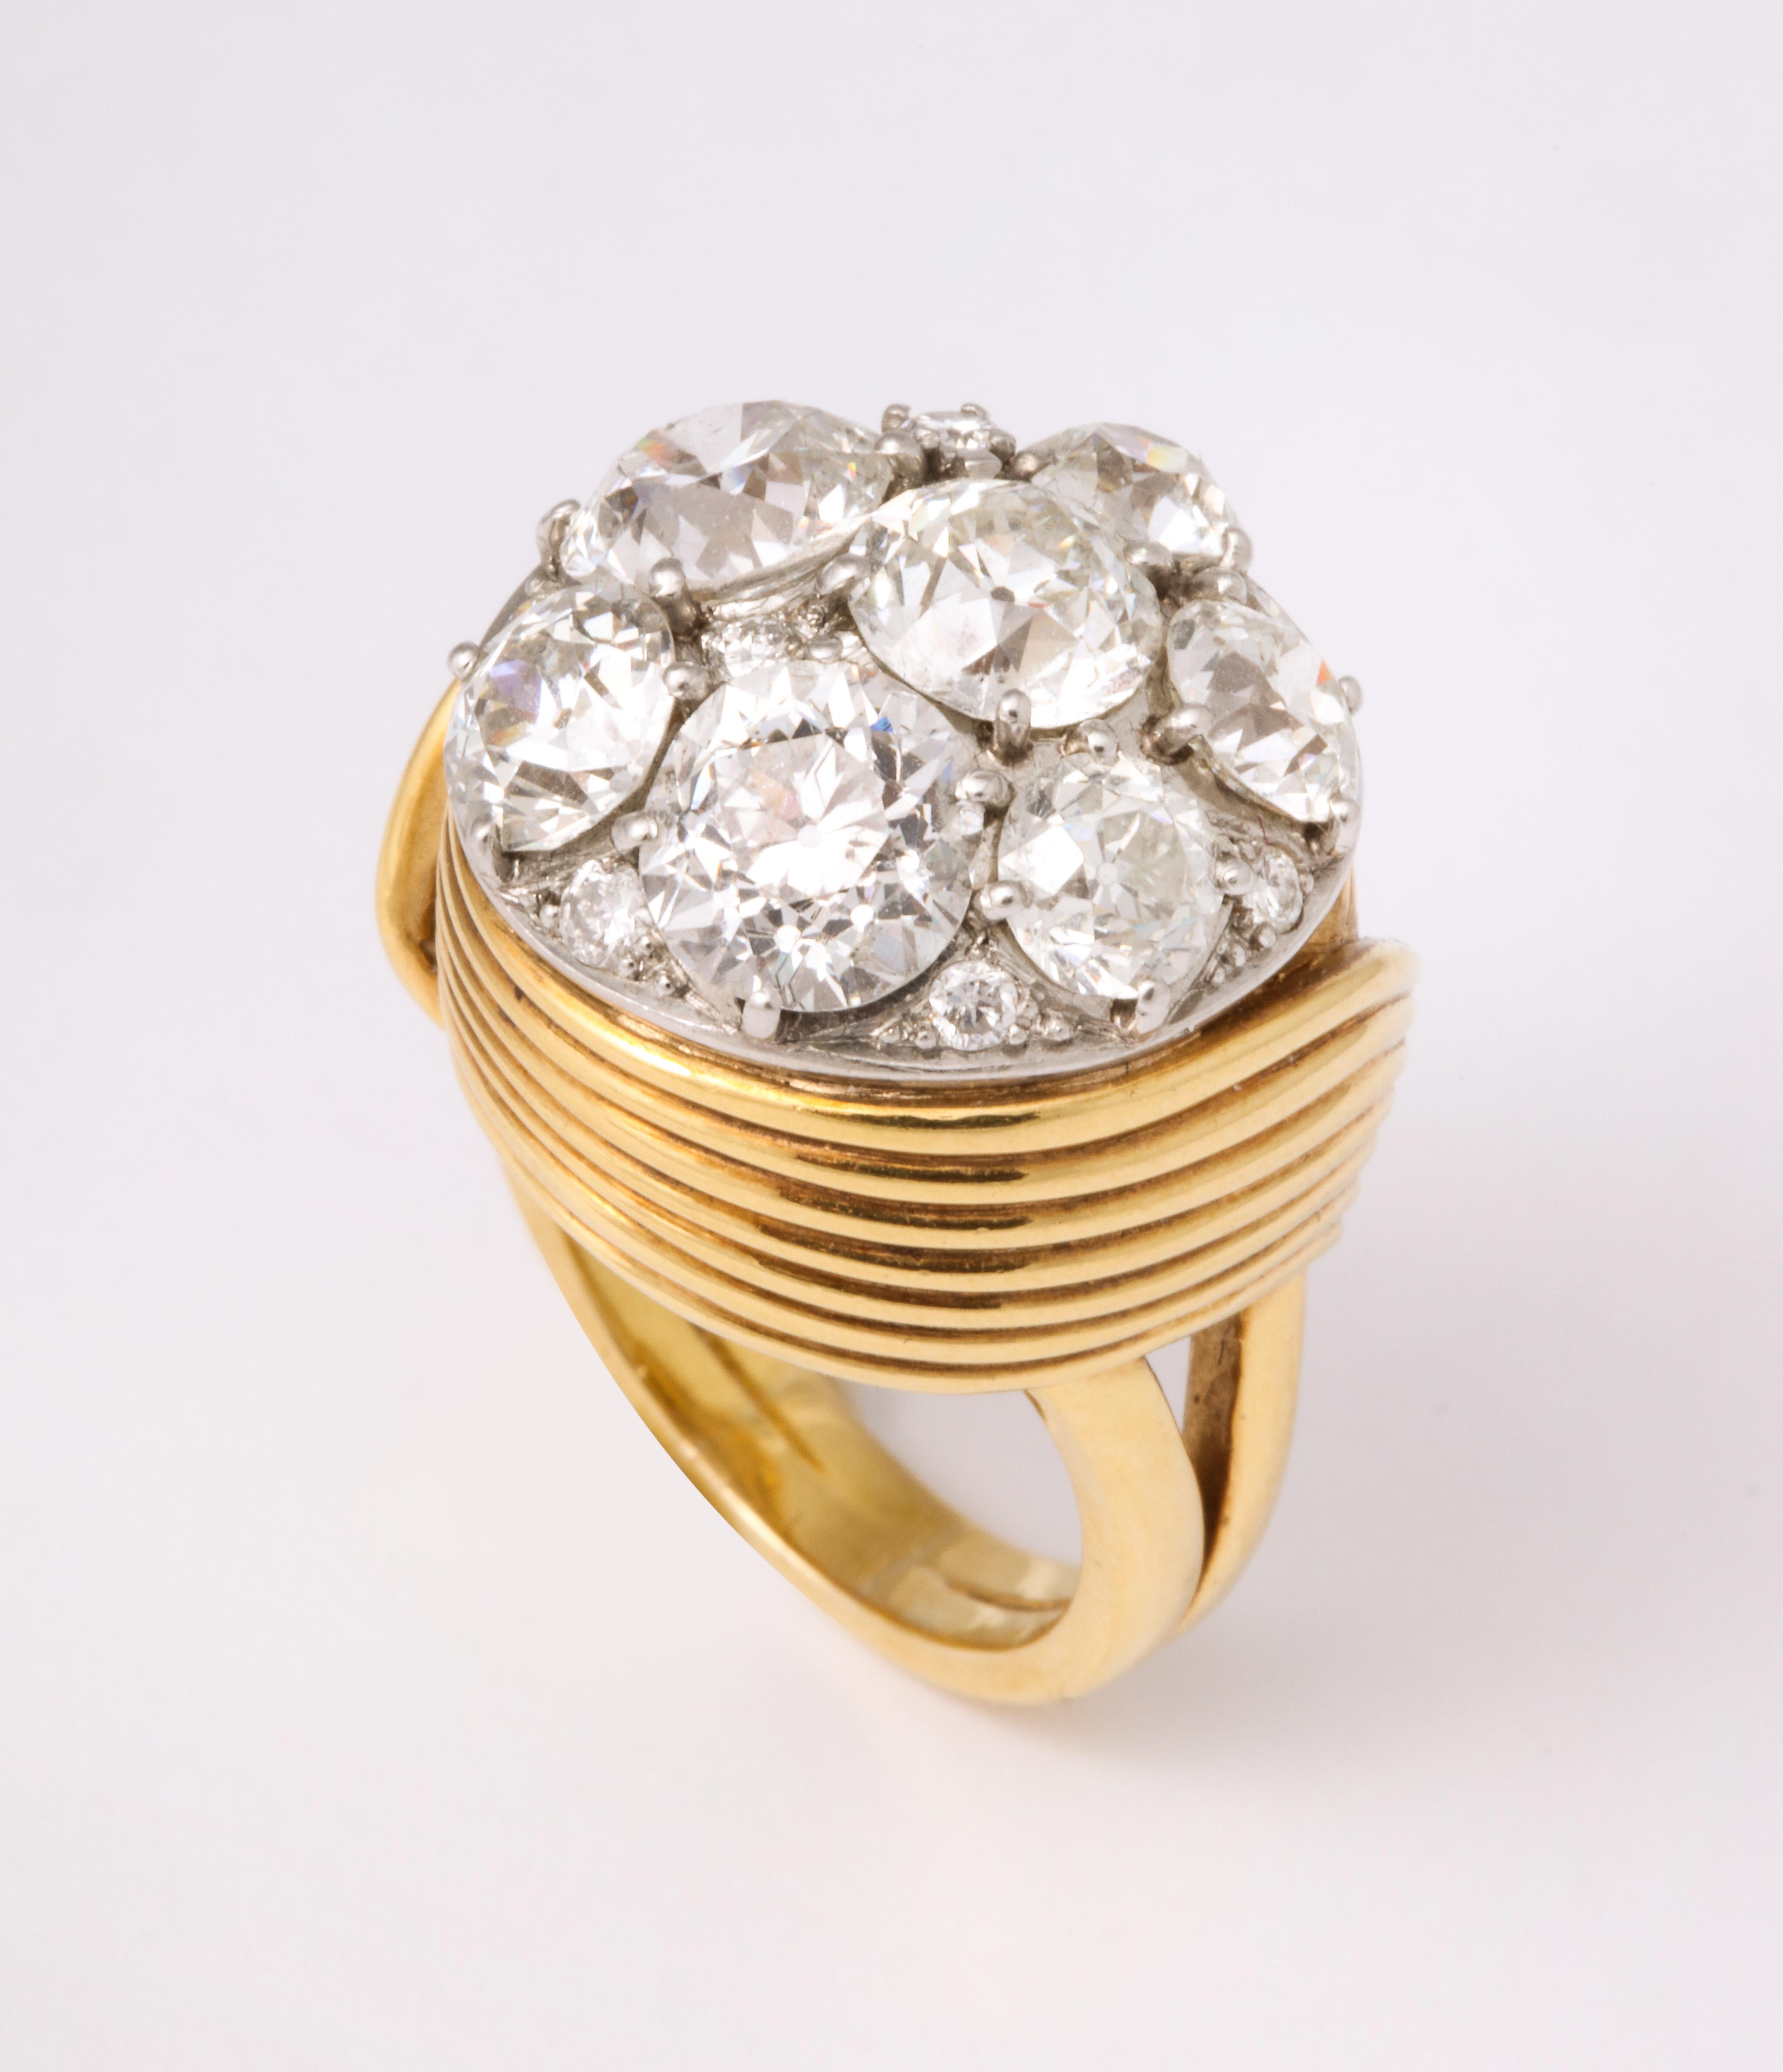 A 1940's 18K gold and diamond ring combining heritage diamonds made-to-order by famed Park Ave. society jeweler Raymond Yard designed as a sleek ribbon of ribbed gold wrapping 7 Old European cut diamonds and 9 smaller Brilliant cut diamonds. 4.88 